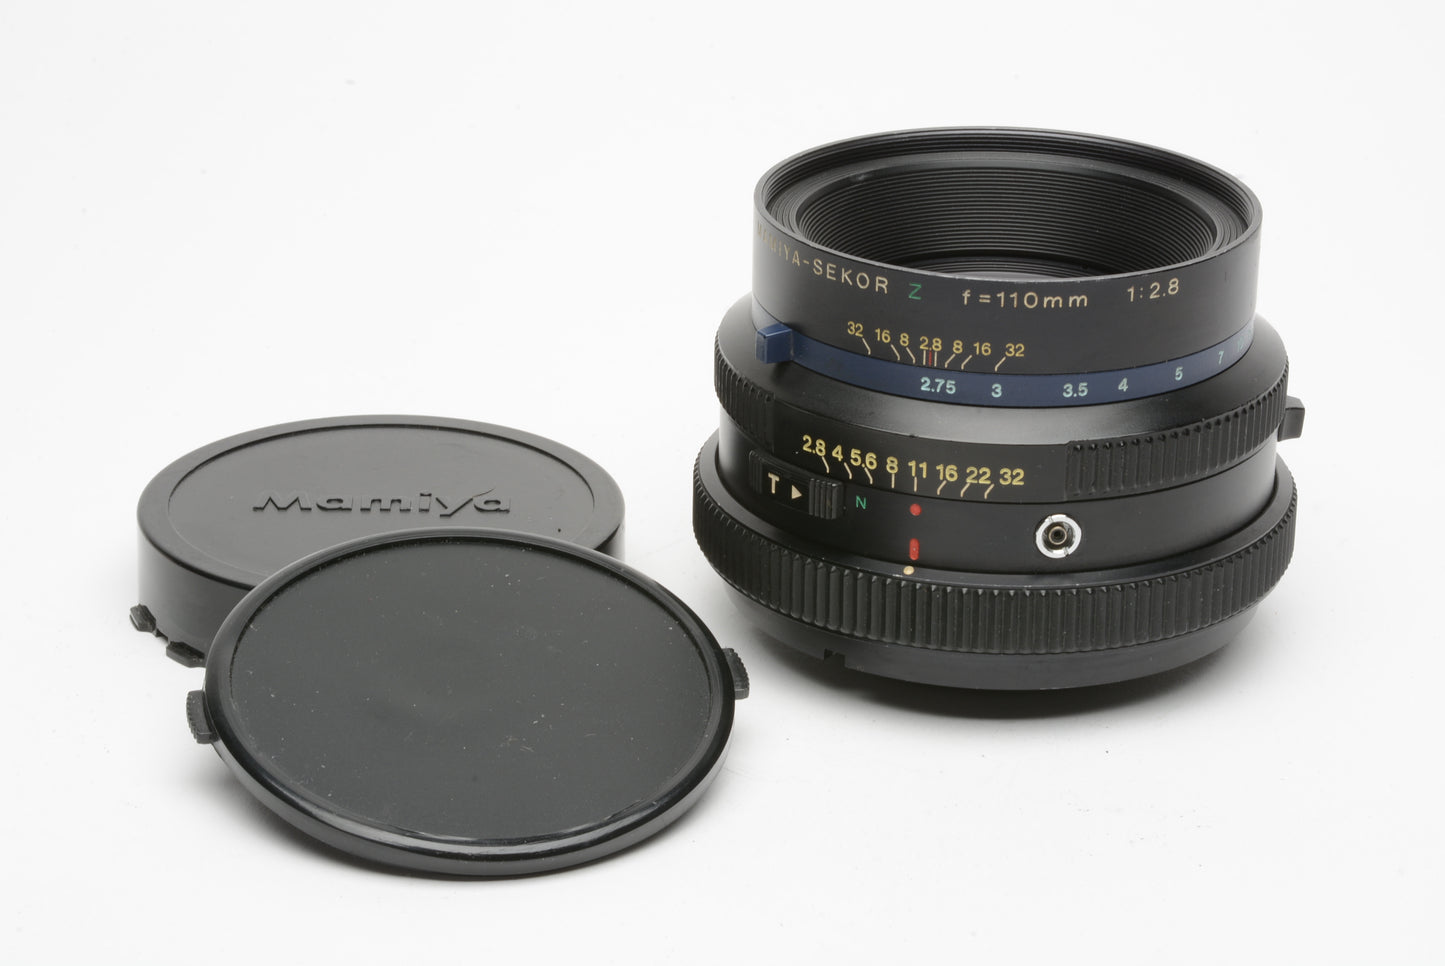 Mamiya Sekor Z 110mm f2.8 for RZ67, caps, clean and sharp